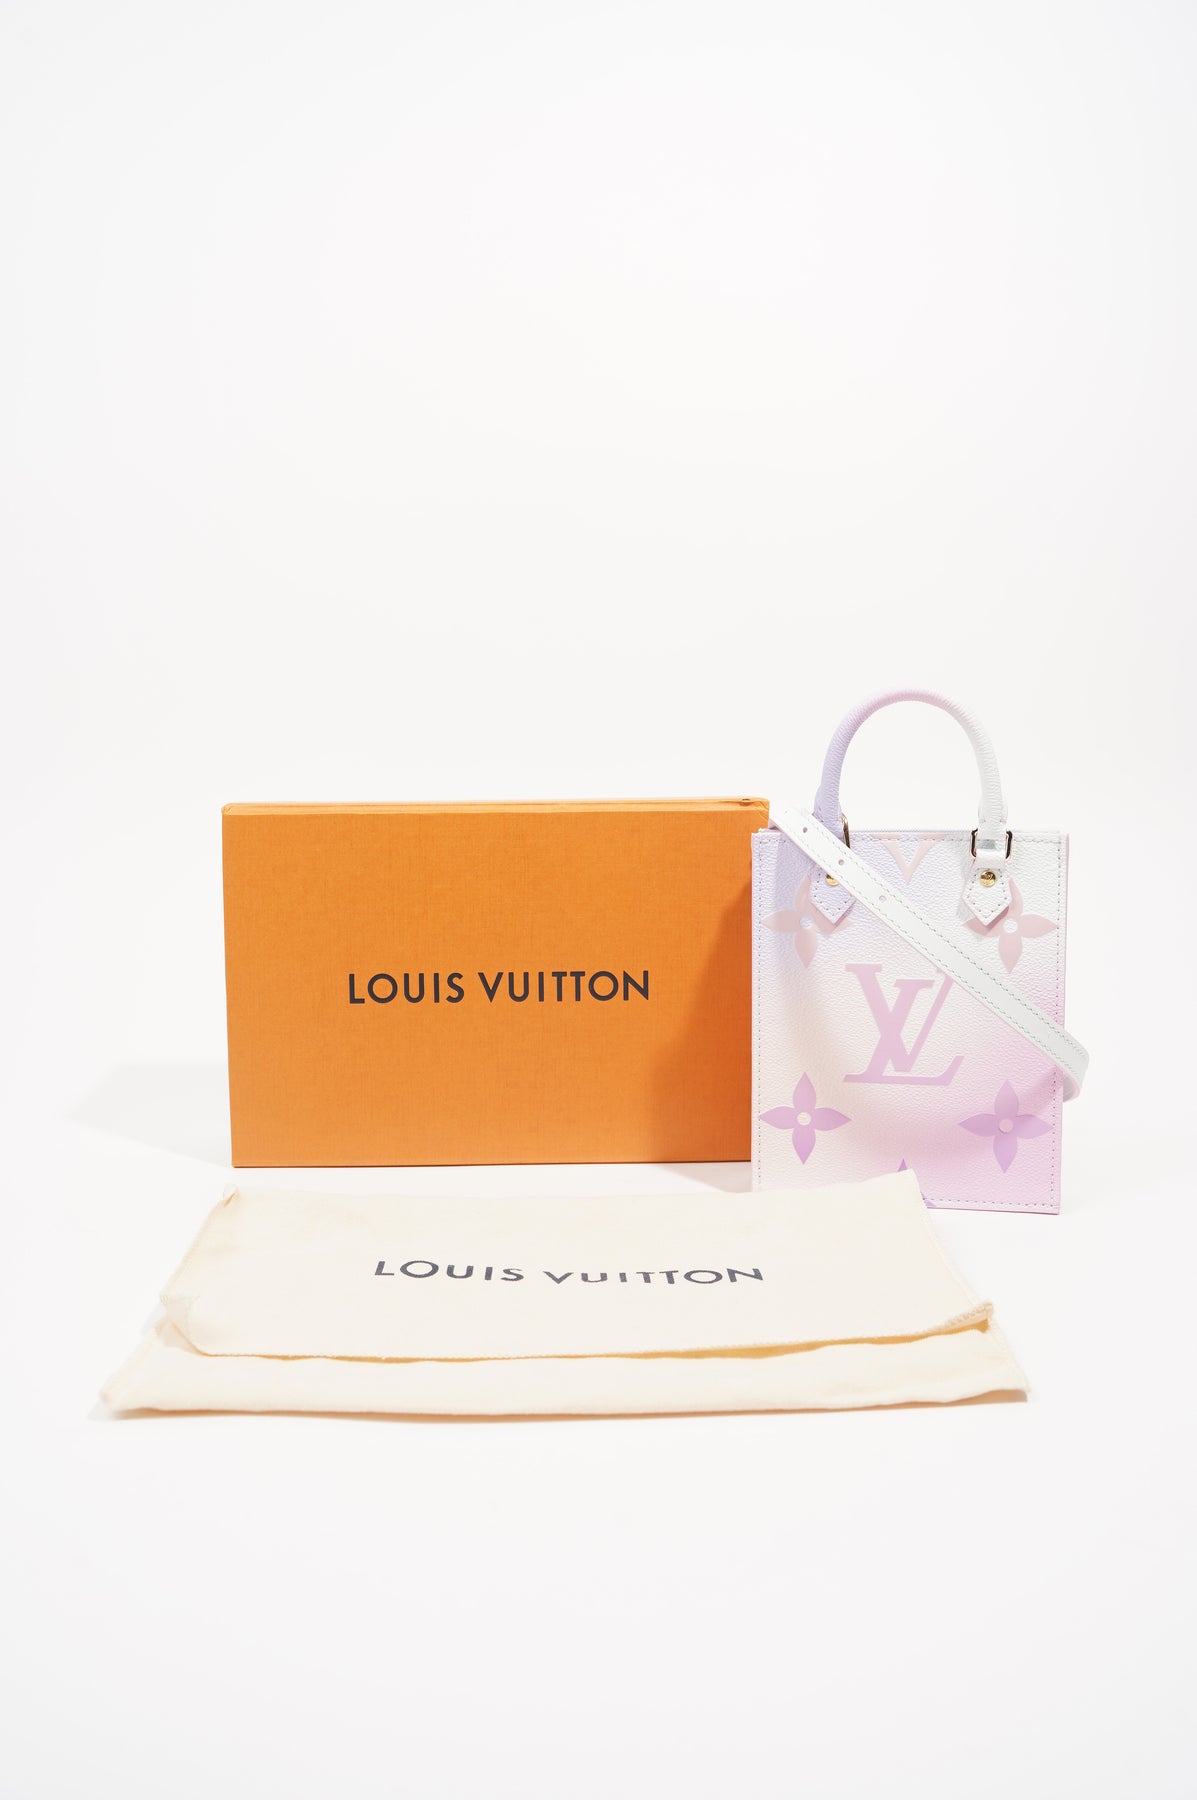 Louis Vuitton's Bleecker Box Handbag Available in Limited Numbers